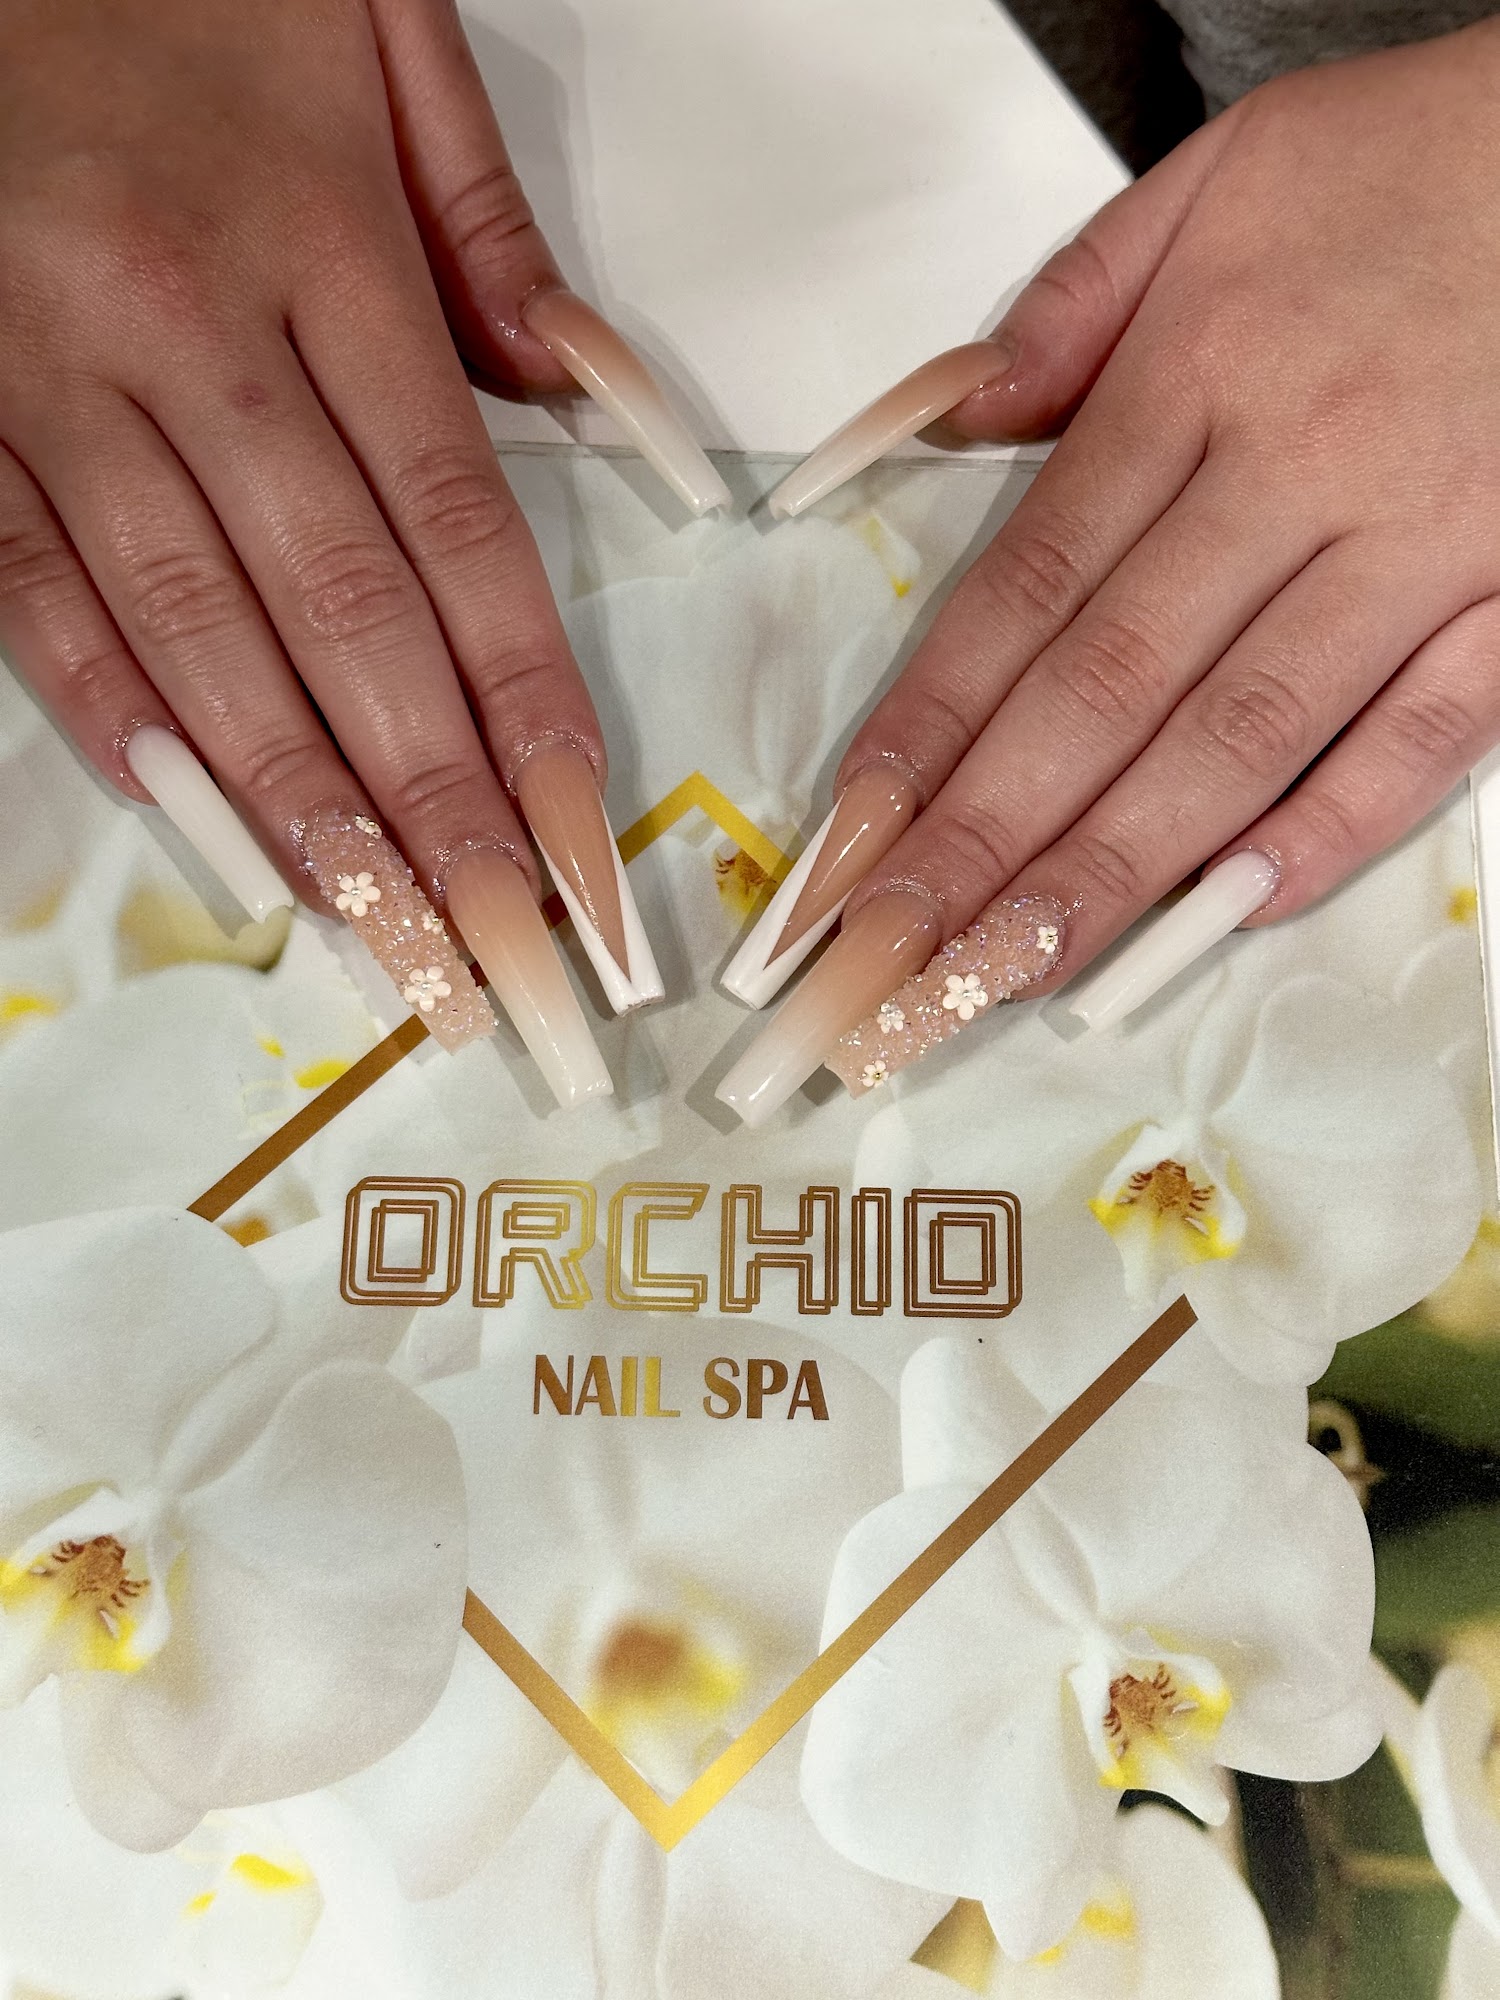 Orchid Nail Spa Limited Company